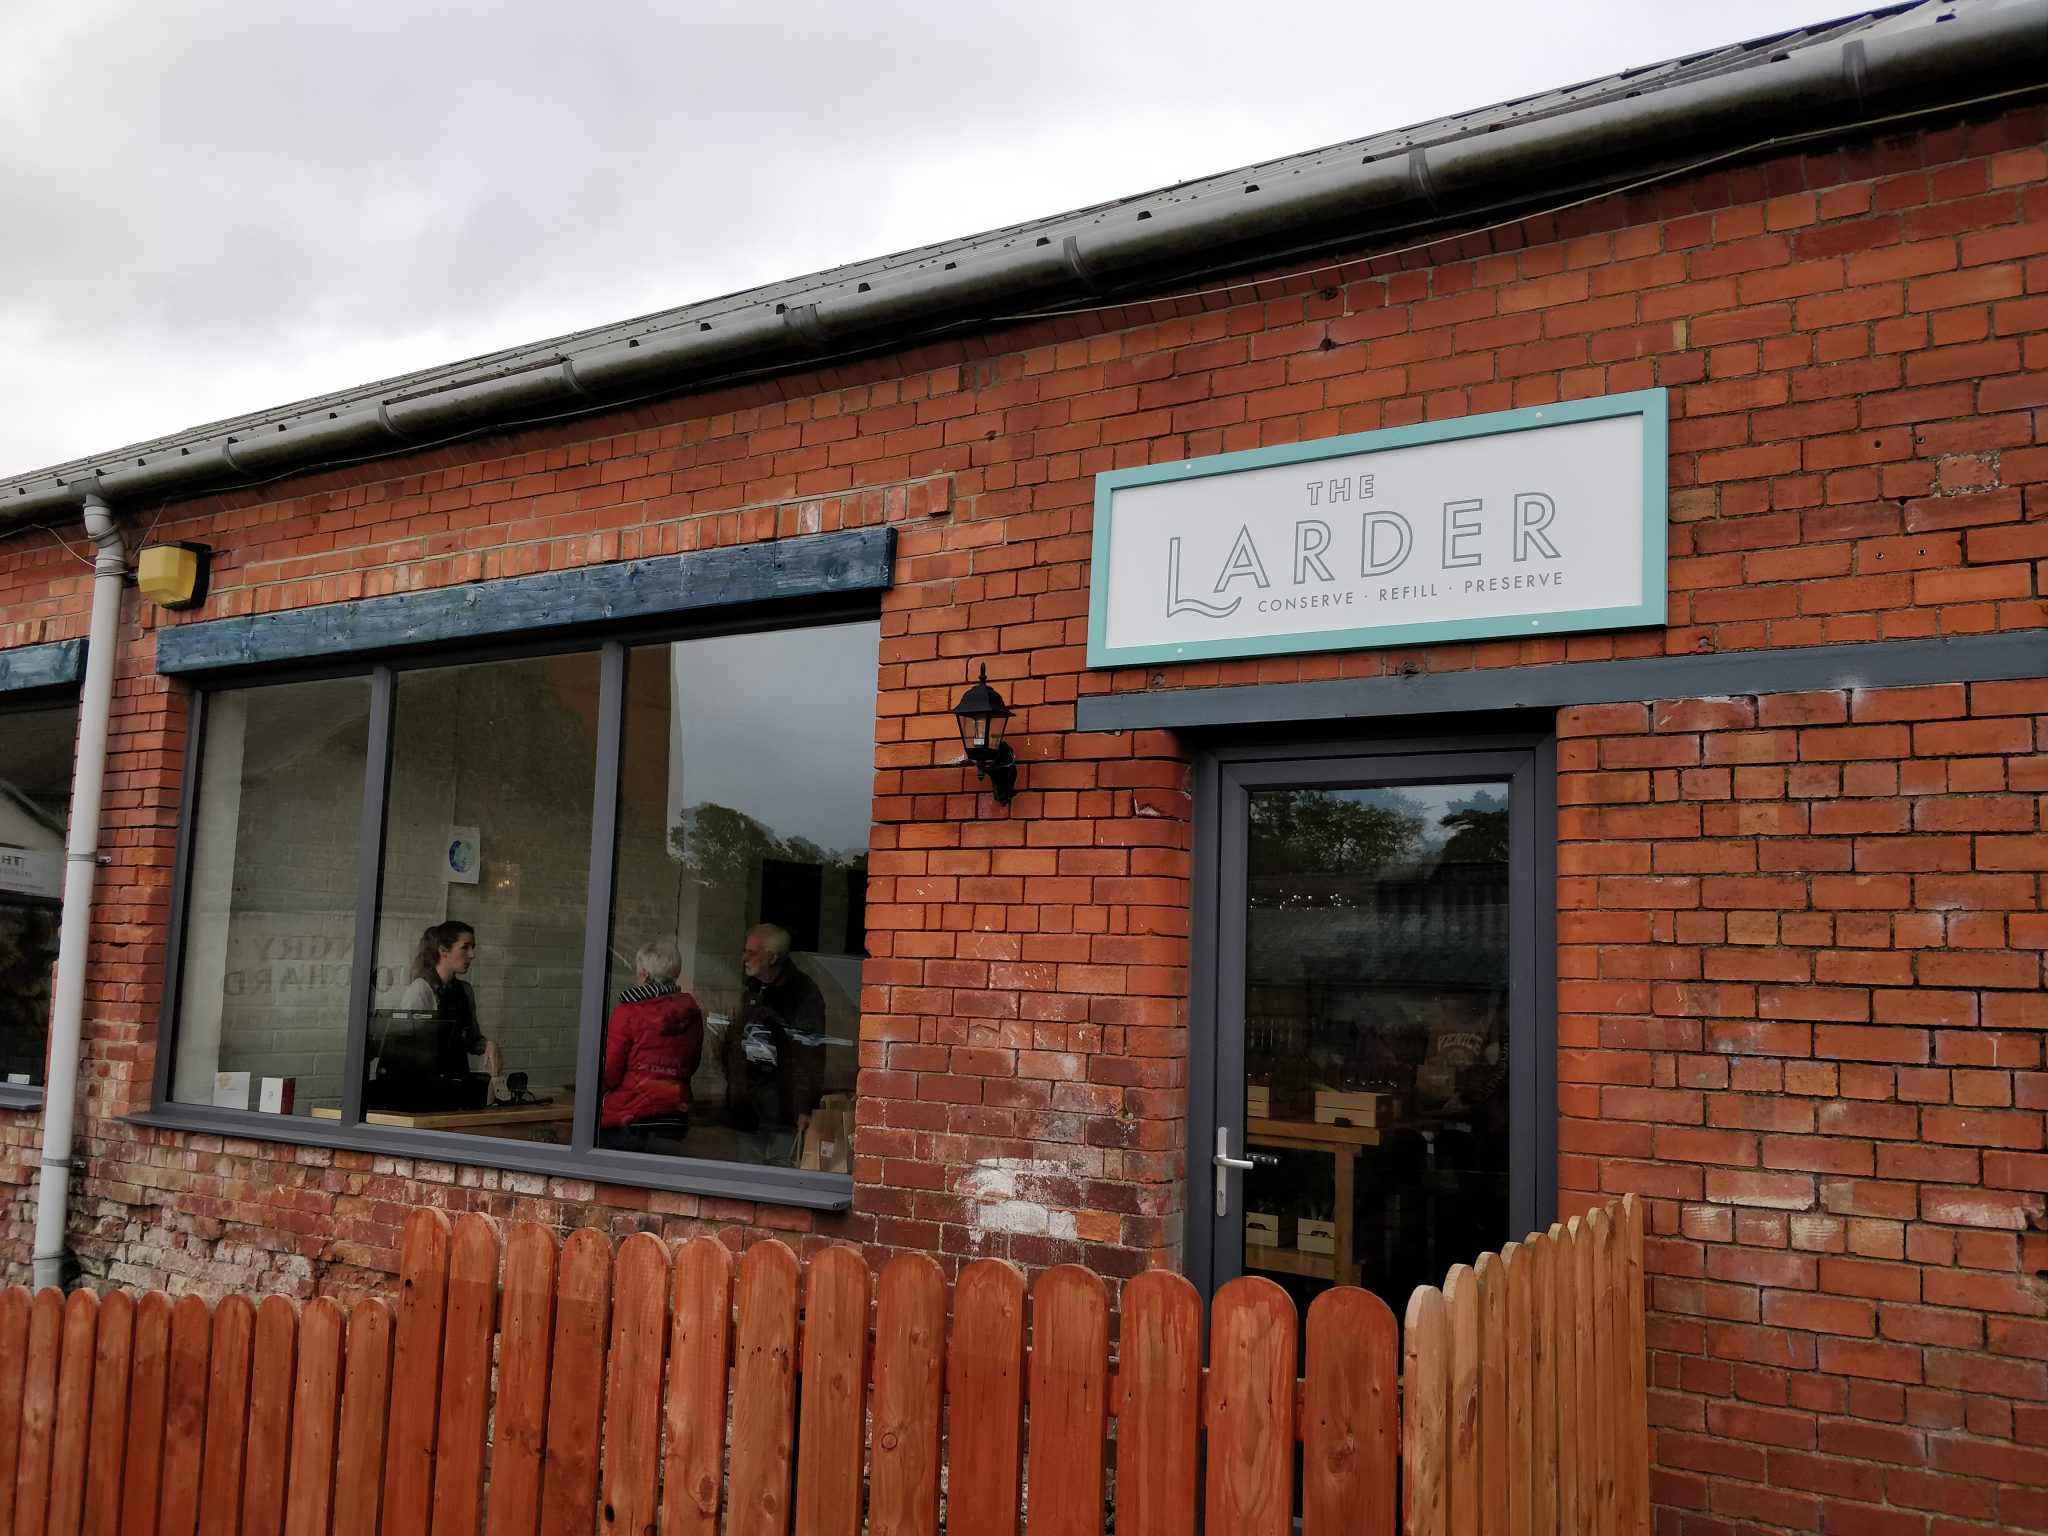 Christmas 2019 at The Larder, Raceview Mill, Broughshane